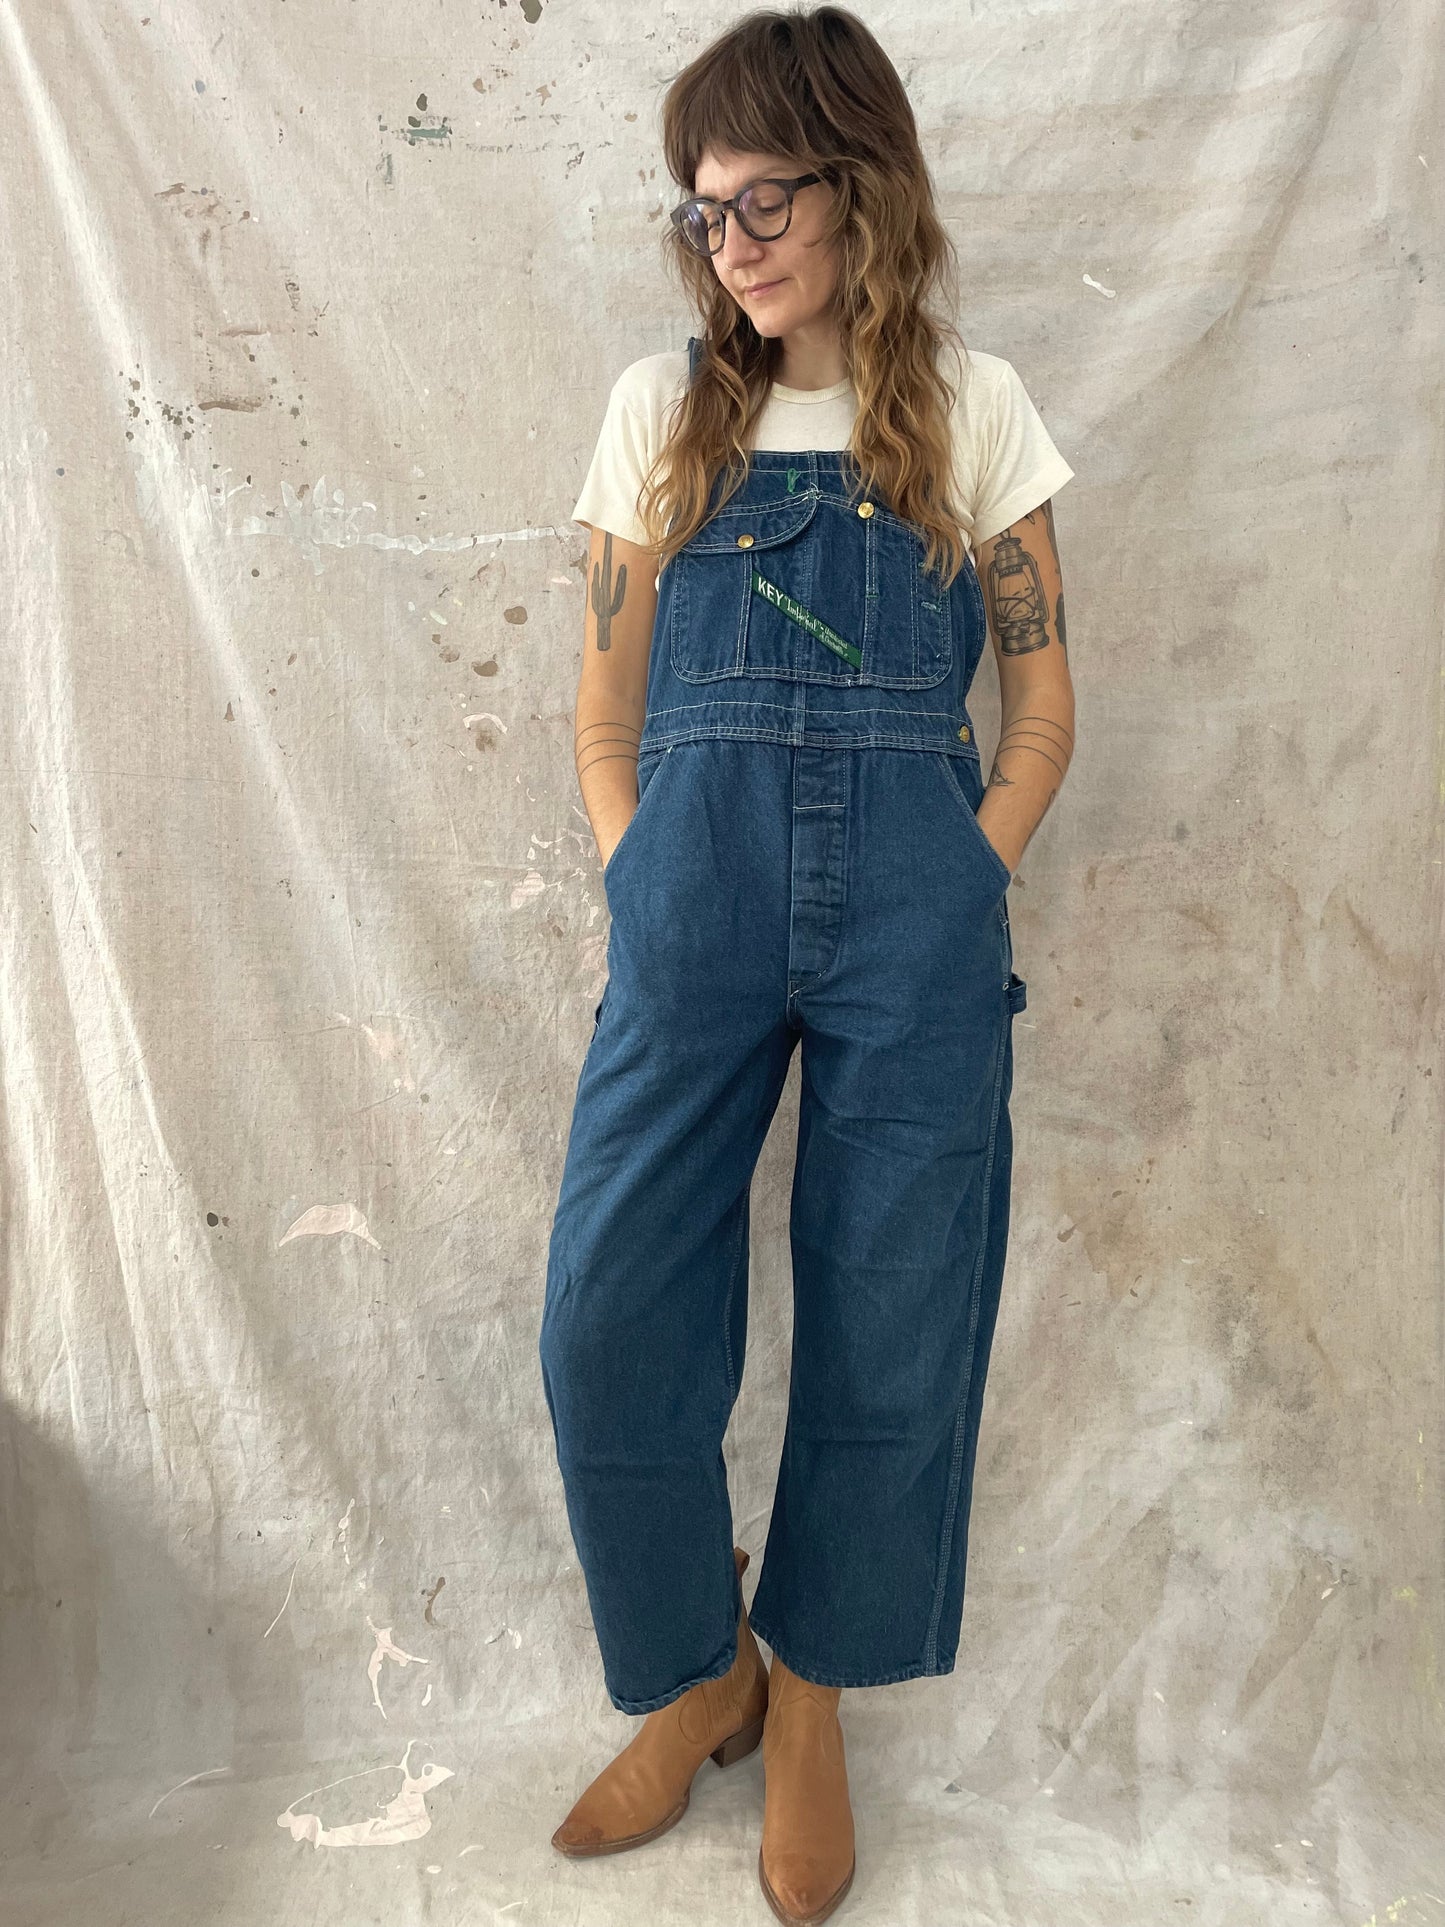 80s Key Imperial Overalls